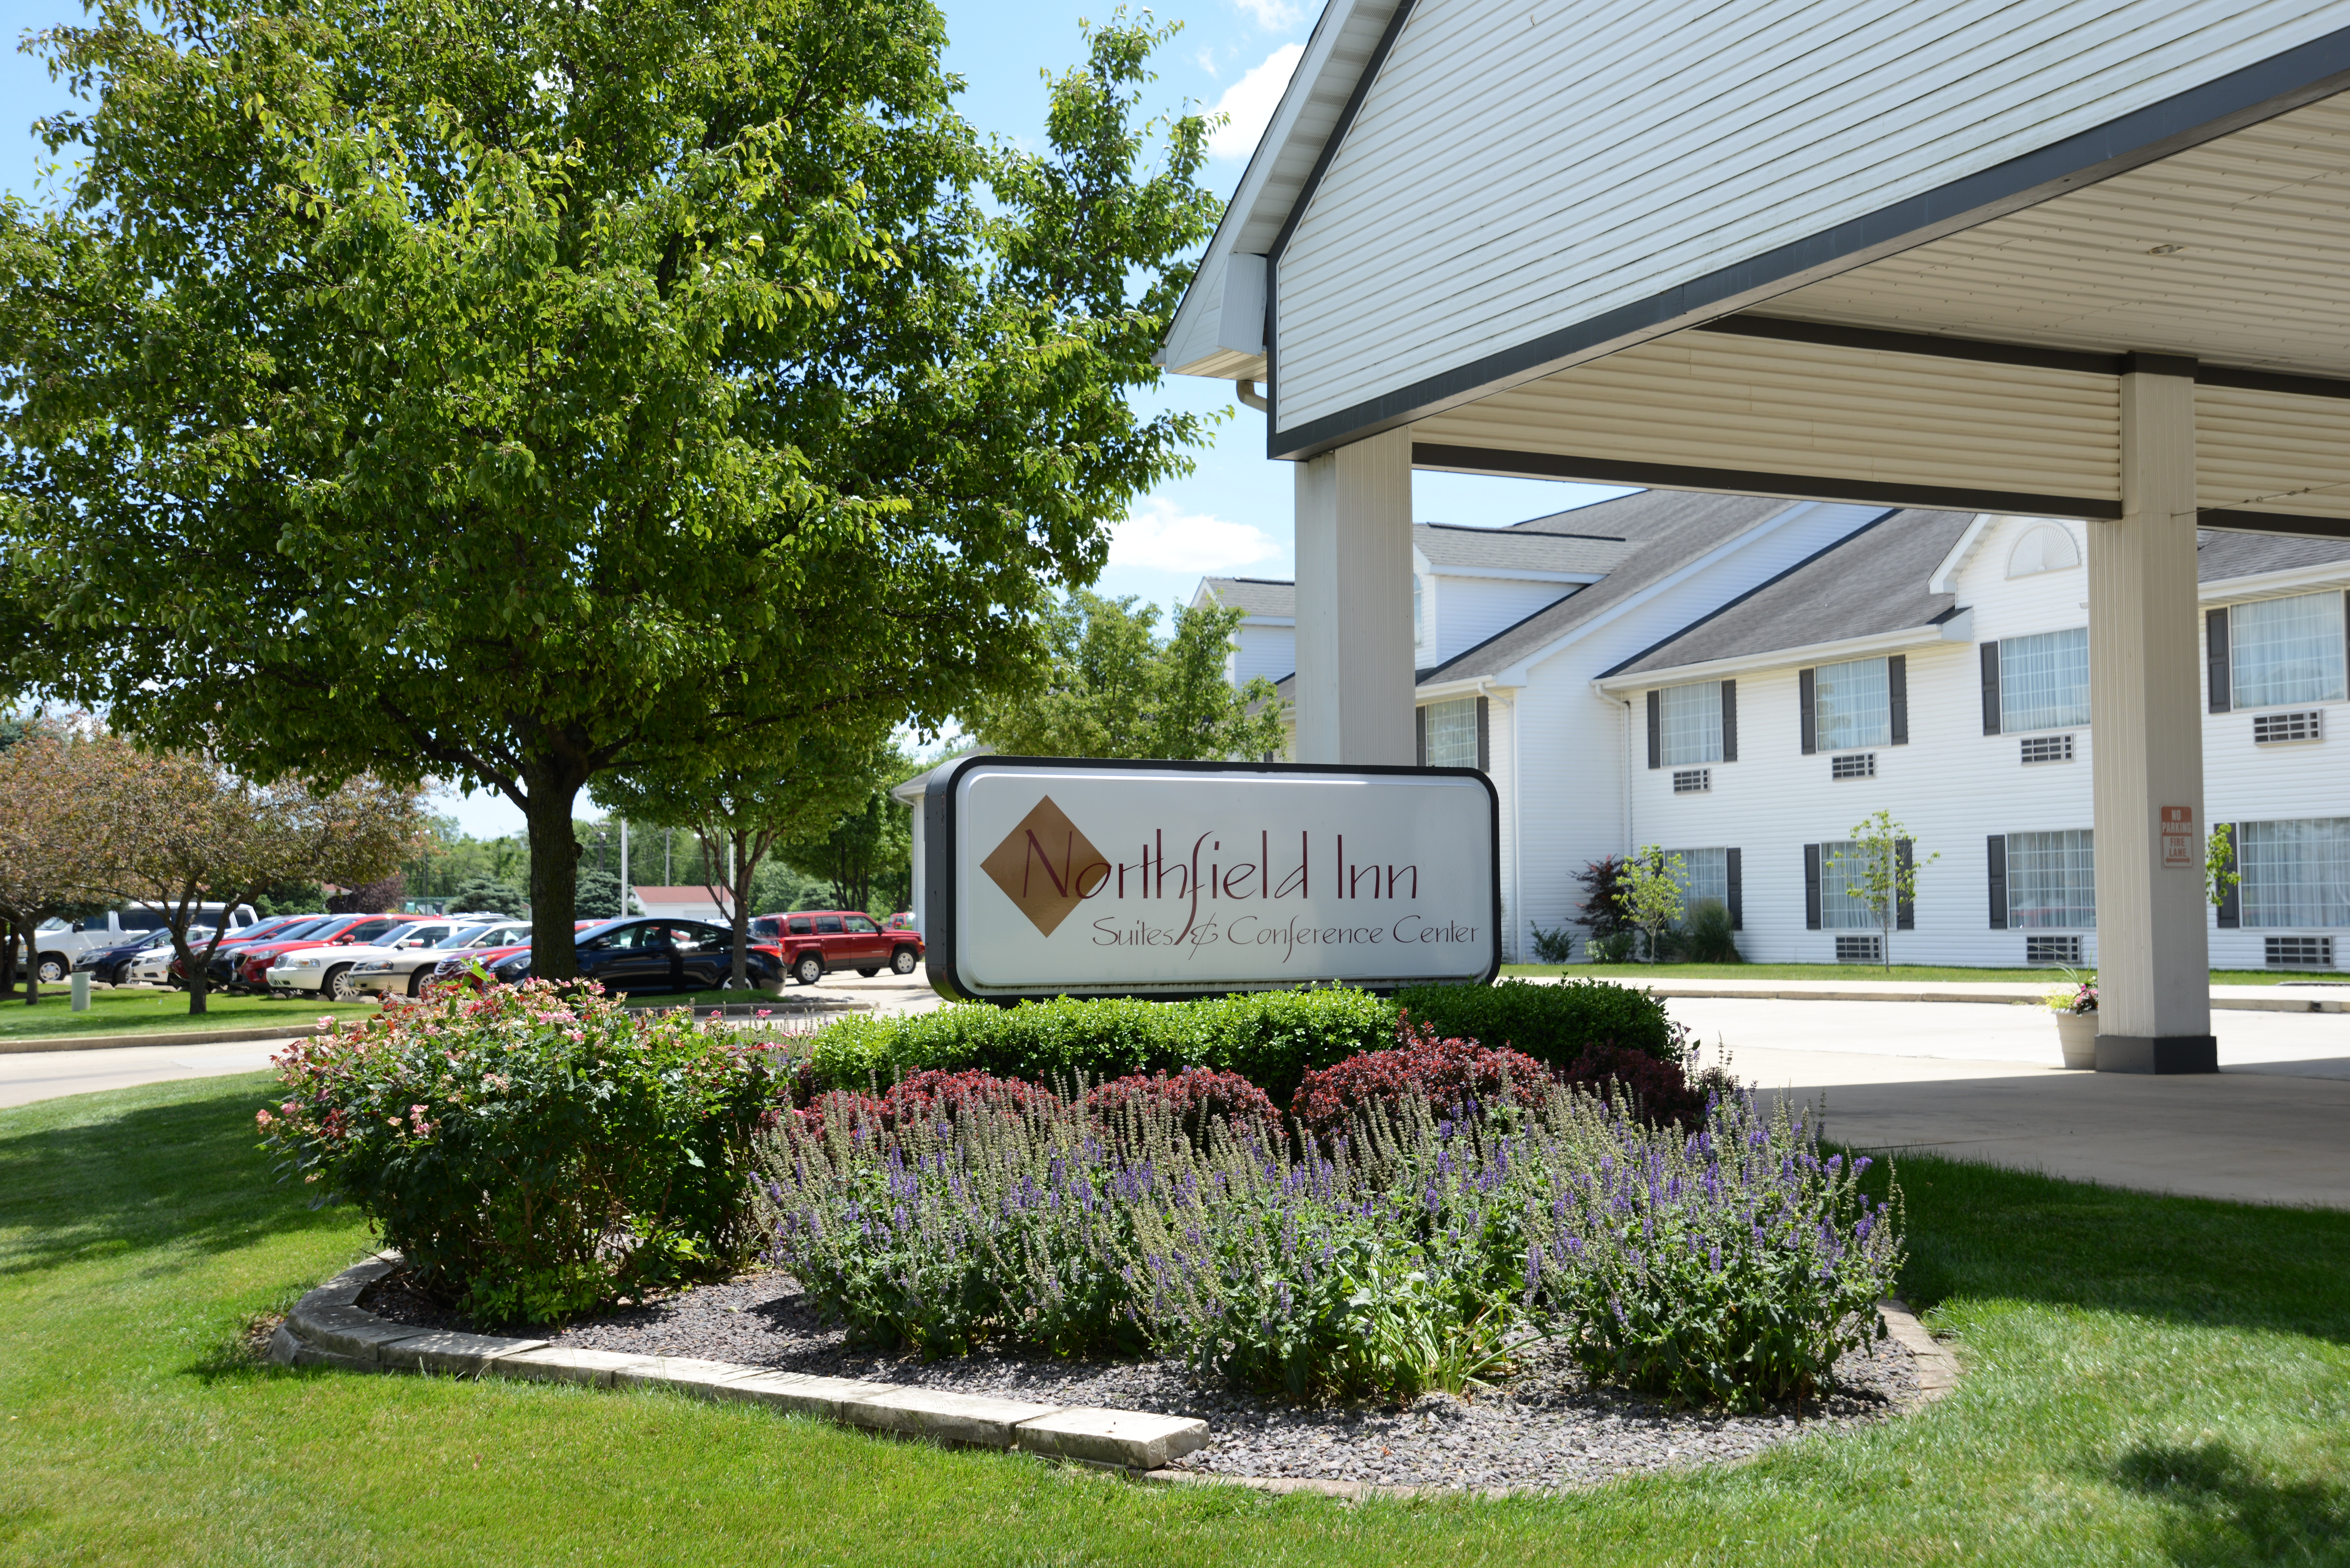 Northfield Inn, Suites & Conference Center